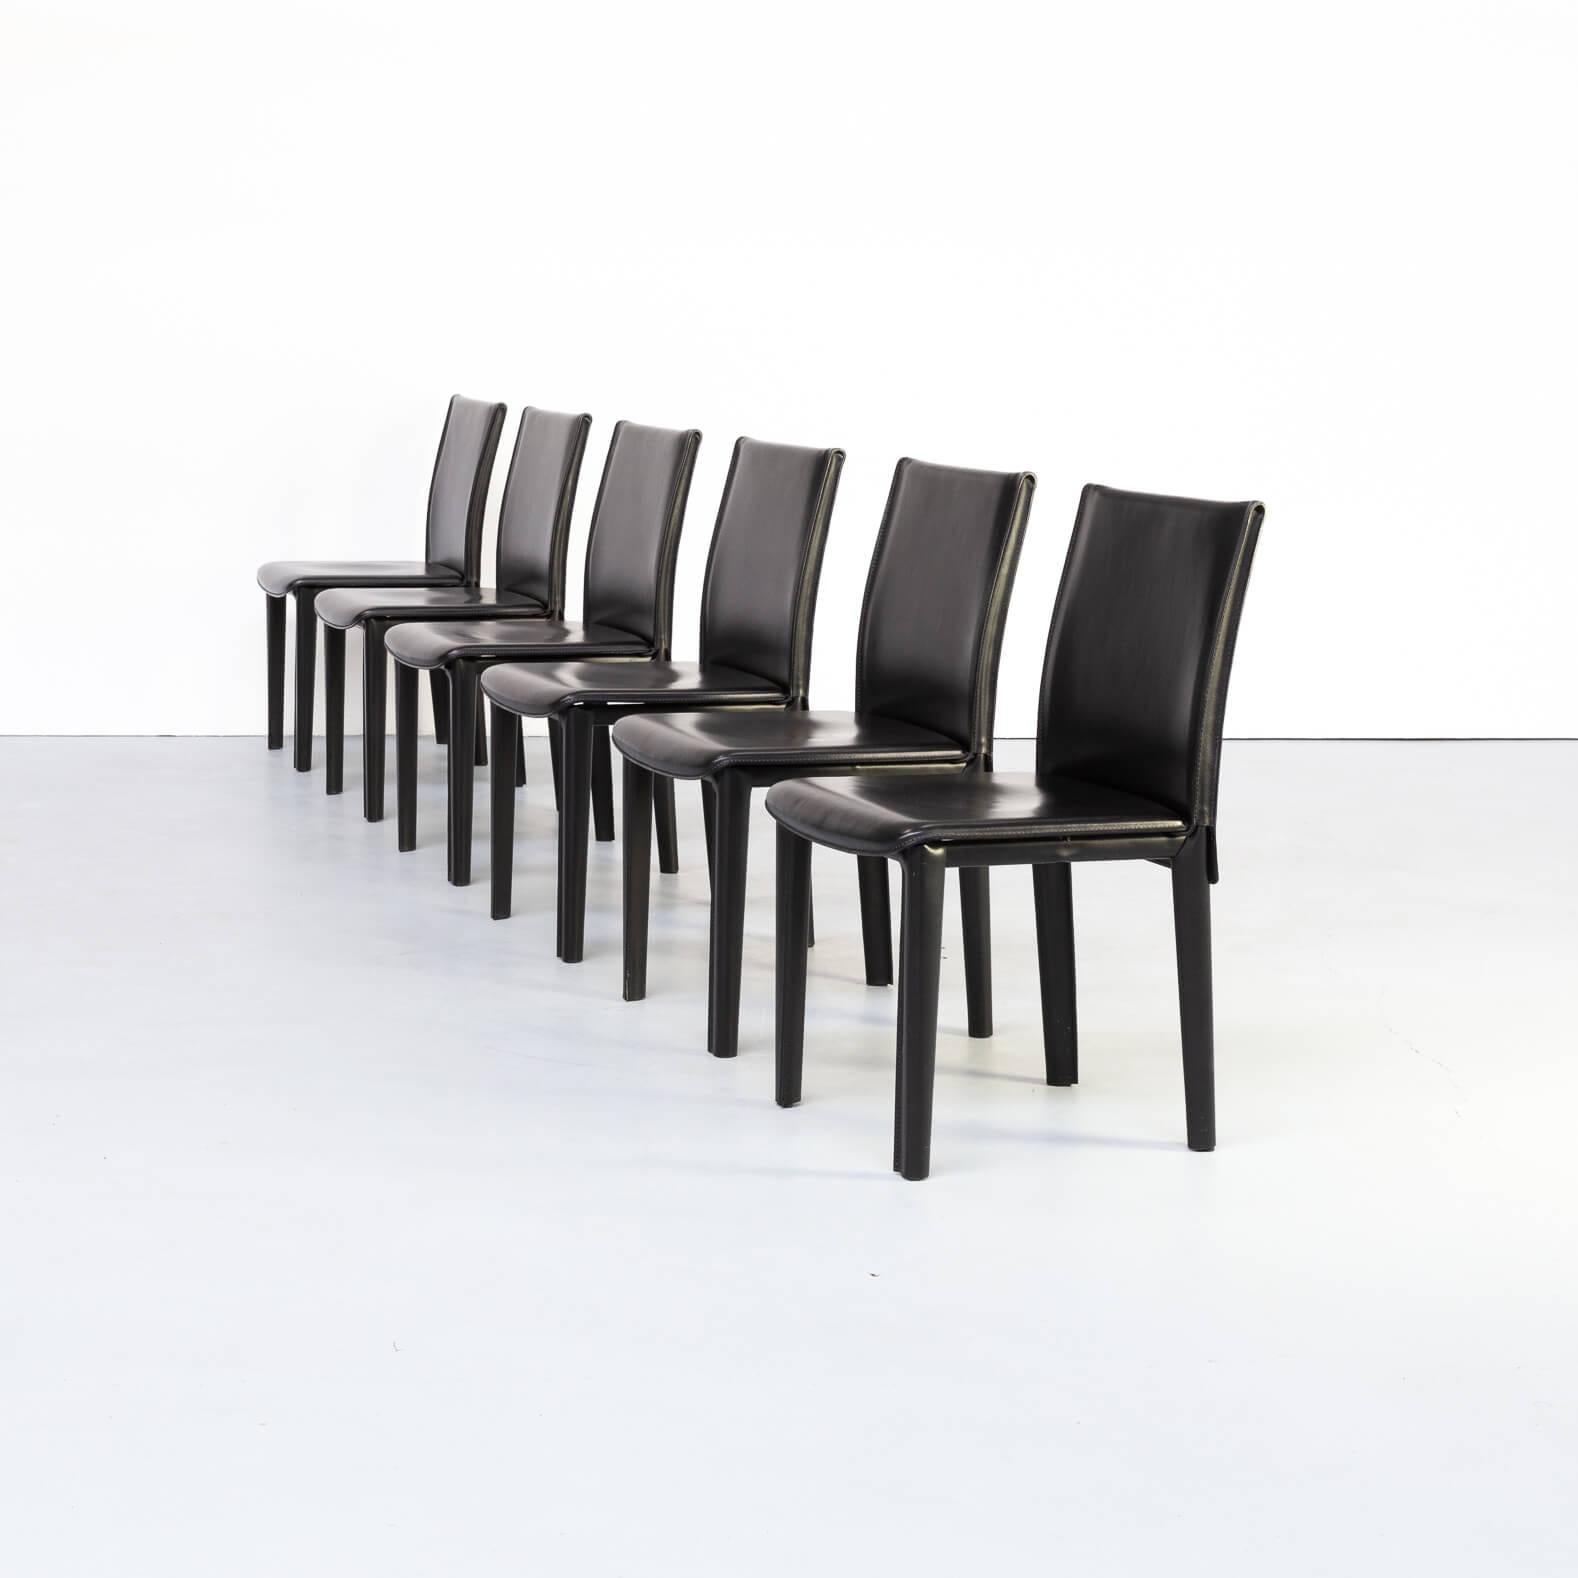 Arper mainly surprises with modernistic designs combined with a lot of comfort.These high back dining room chairs are in black leather on metal frames. Set in good condition consistent with age and use.